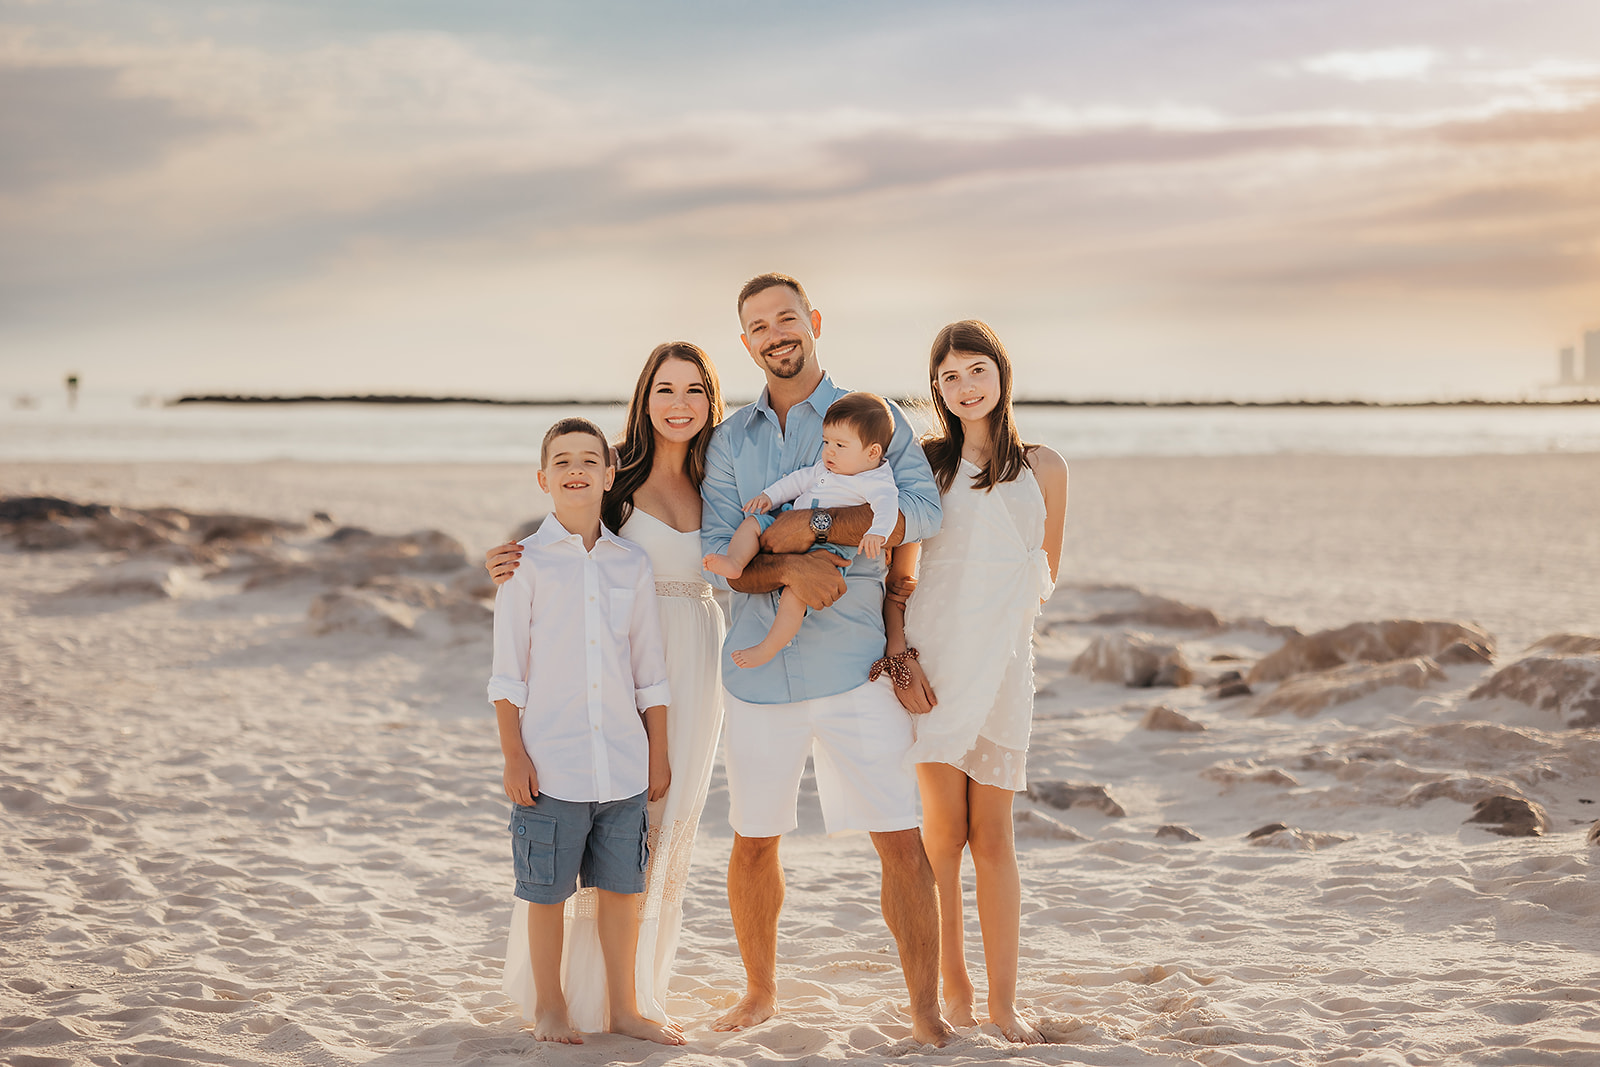 Beach Family Photoshoot in Orange Beach - Family group photo with water and rocks in the background